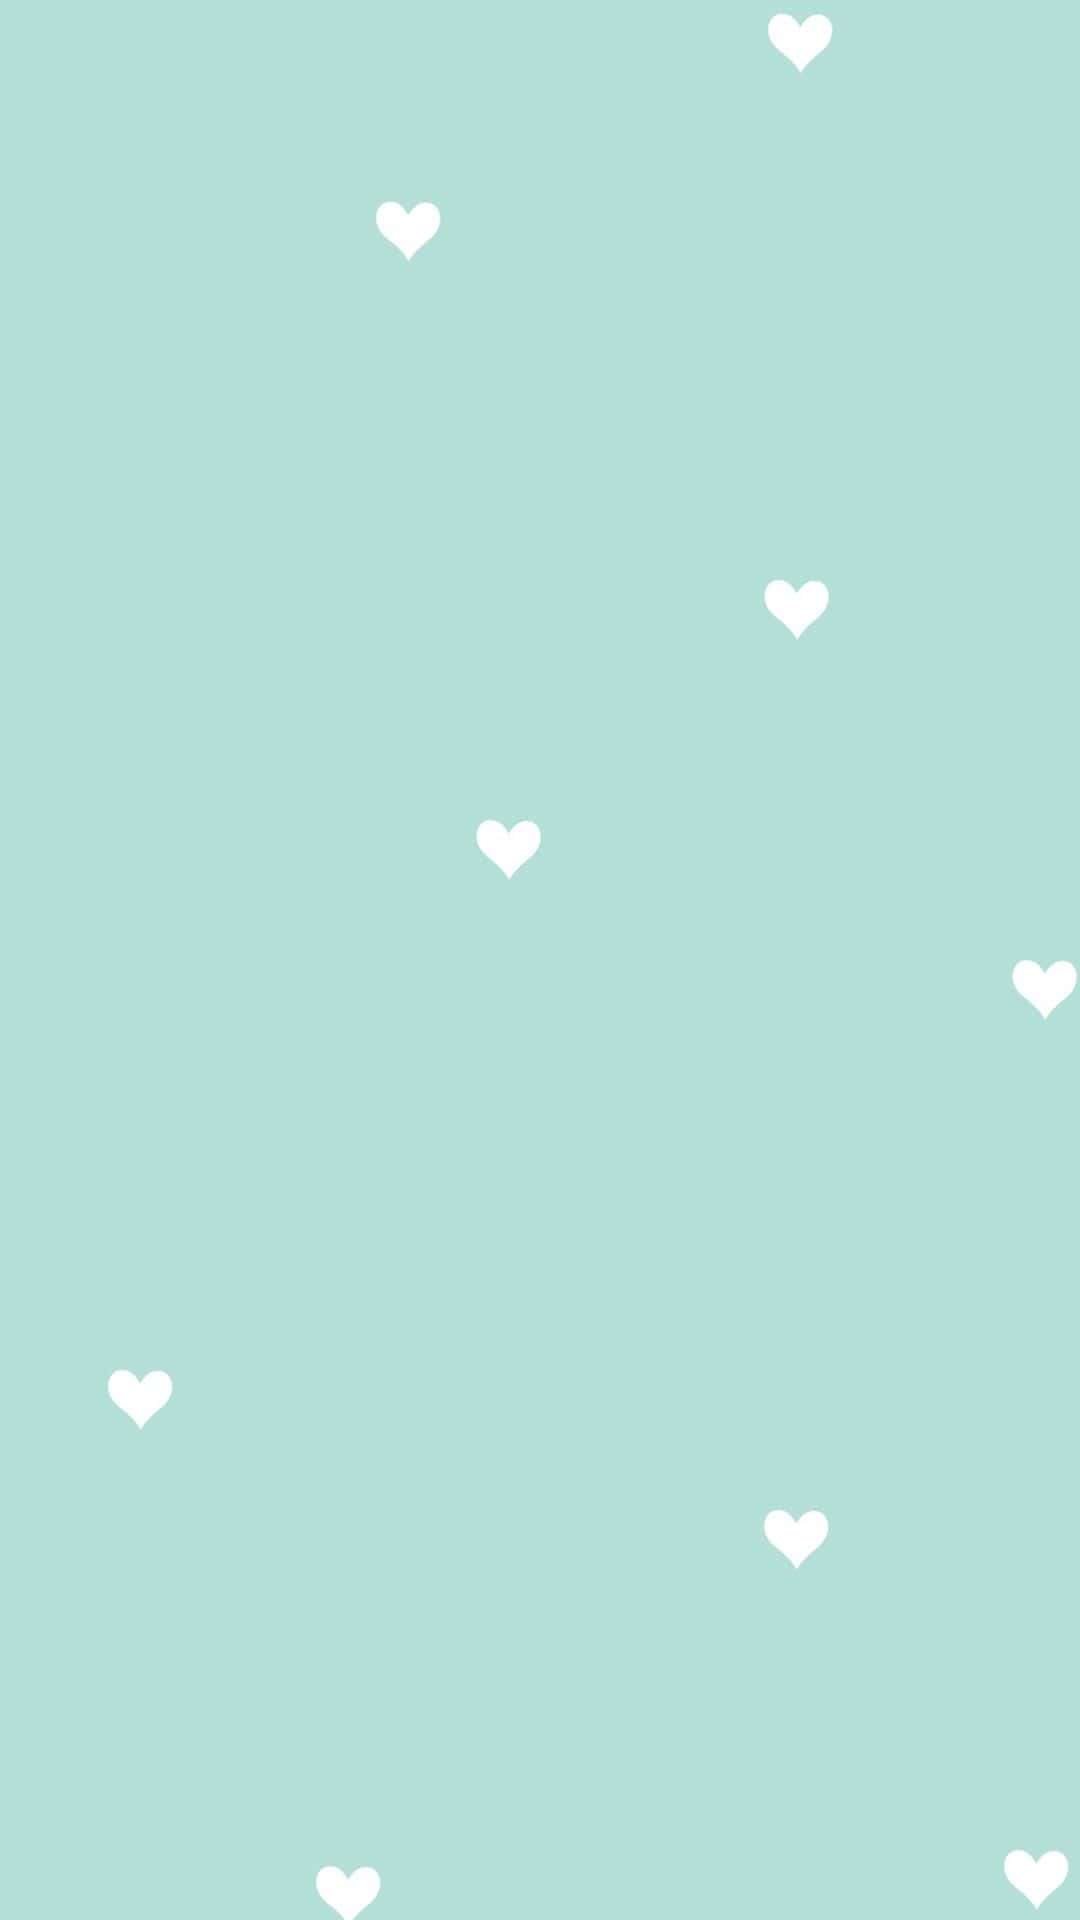 40 Mint Green Wallpaper Backgrounds For Iphone  Mint green wallpaper  iphone Mint green wallpaper Mint green aesthetic